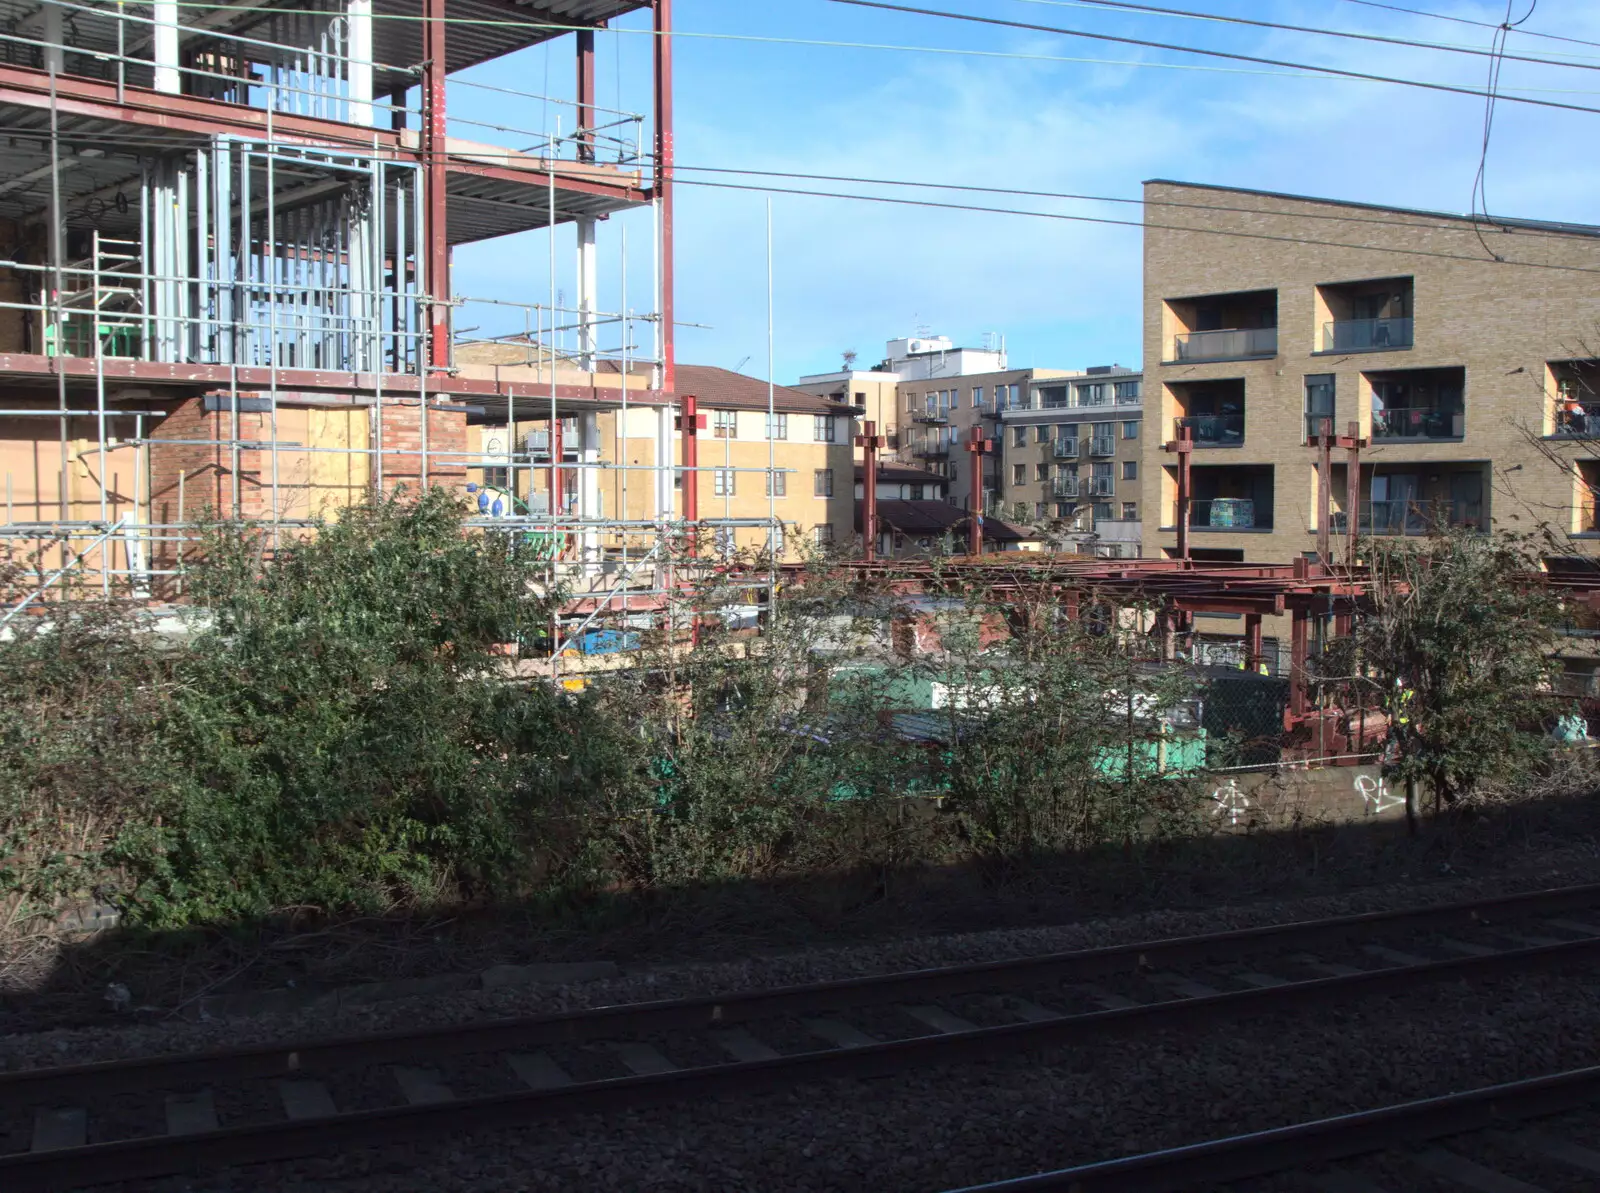 A new building goes up , from Broken-down Freight Trains, Manor Park, London - 28th January 2020